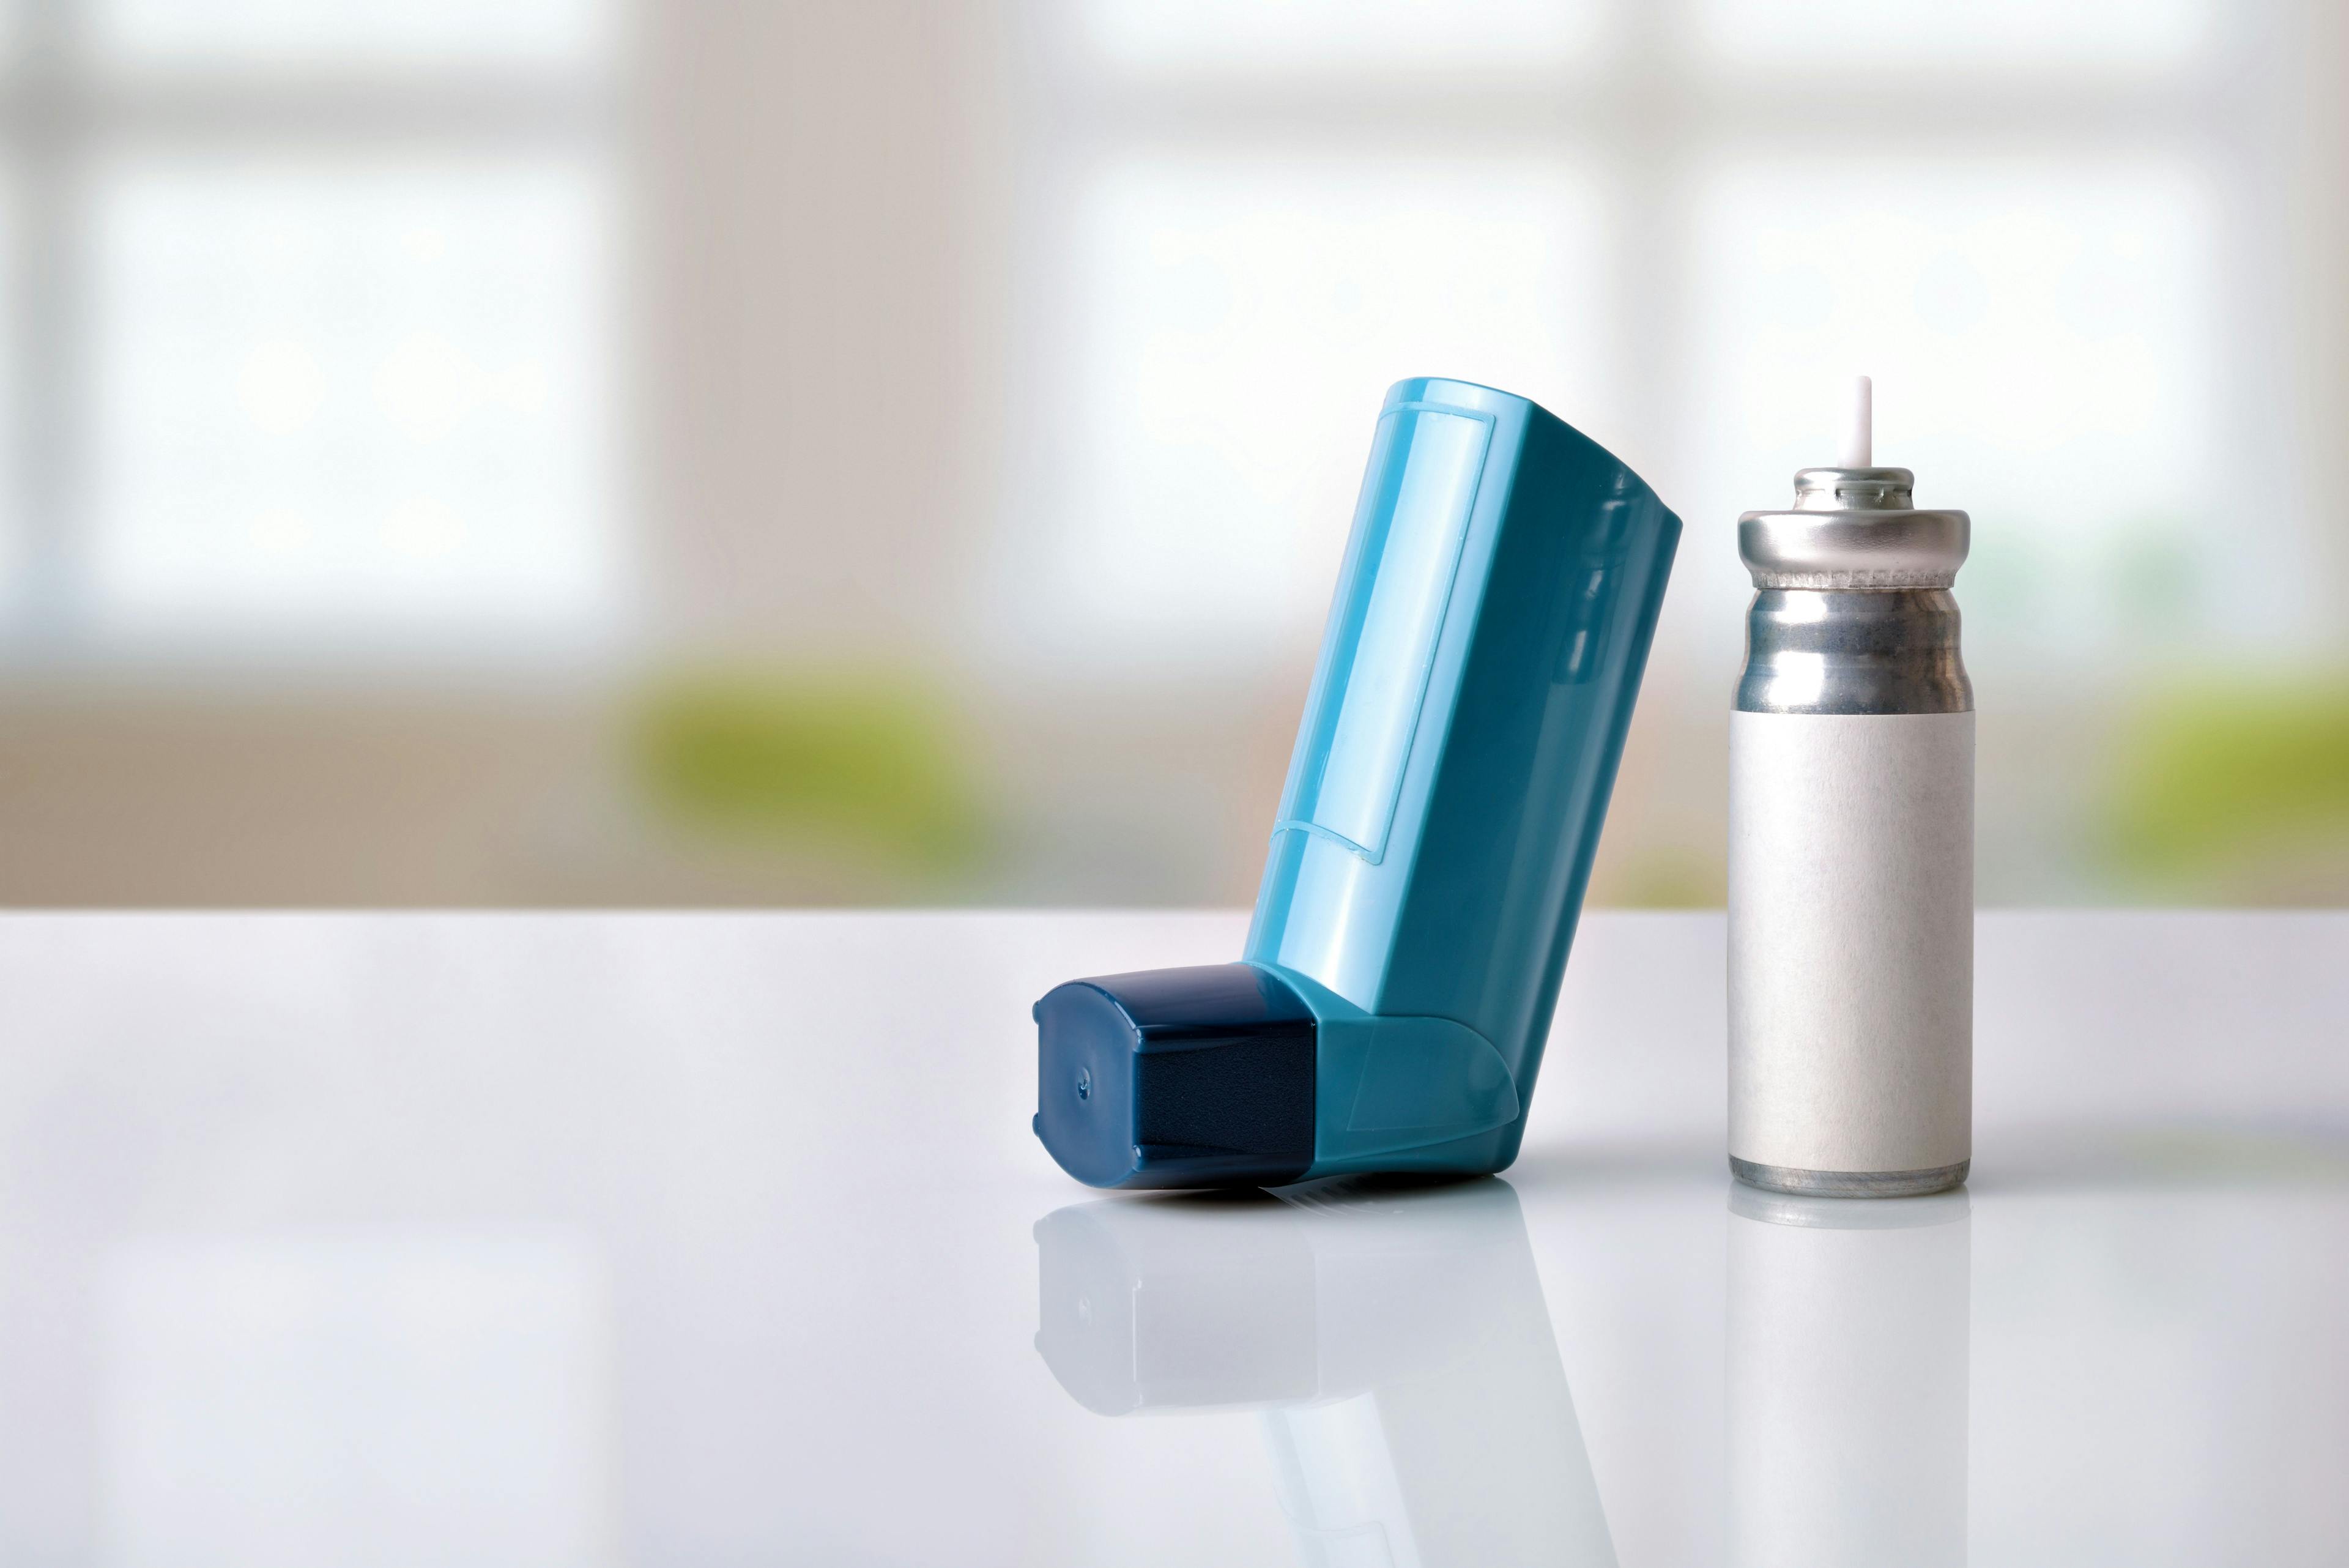 Cartridge and blue medicine inhaler in a room front view | Image Credit: Davizro Photography - stock.adobe.com